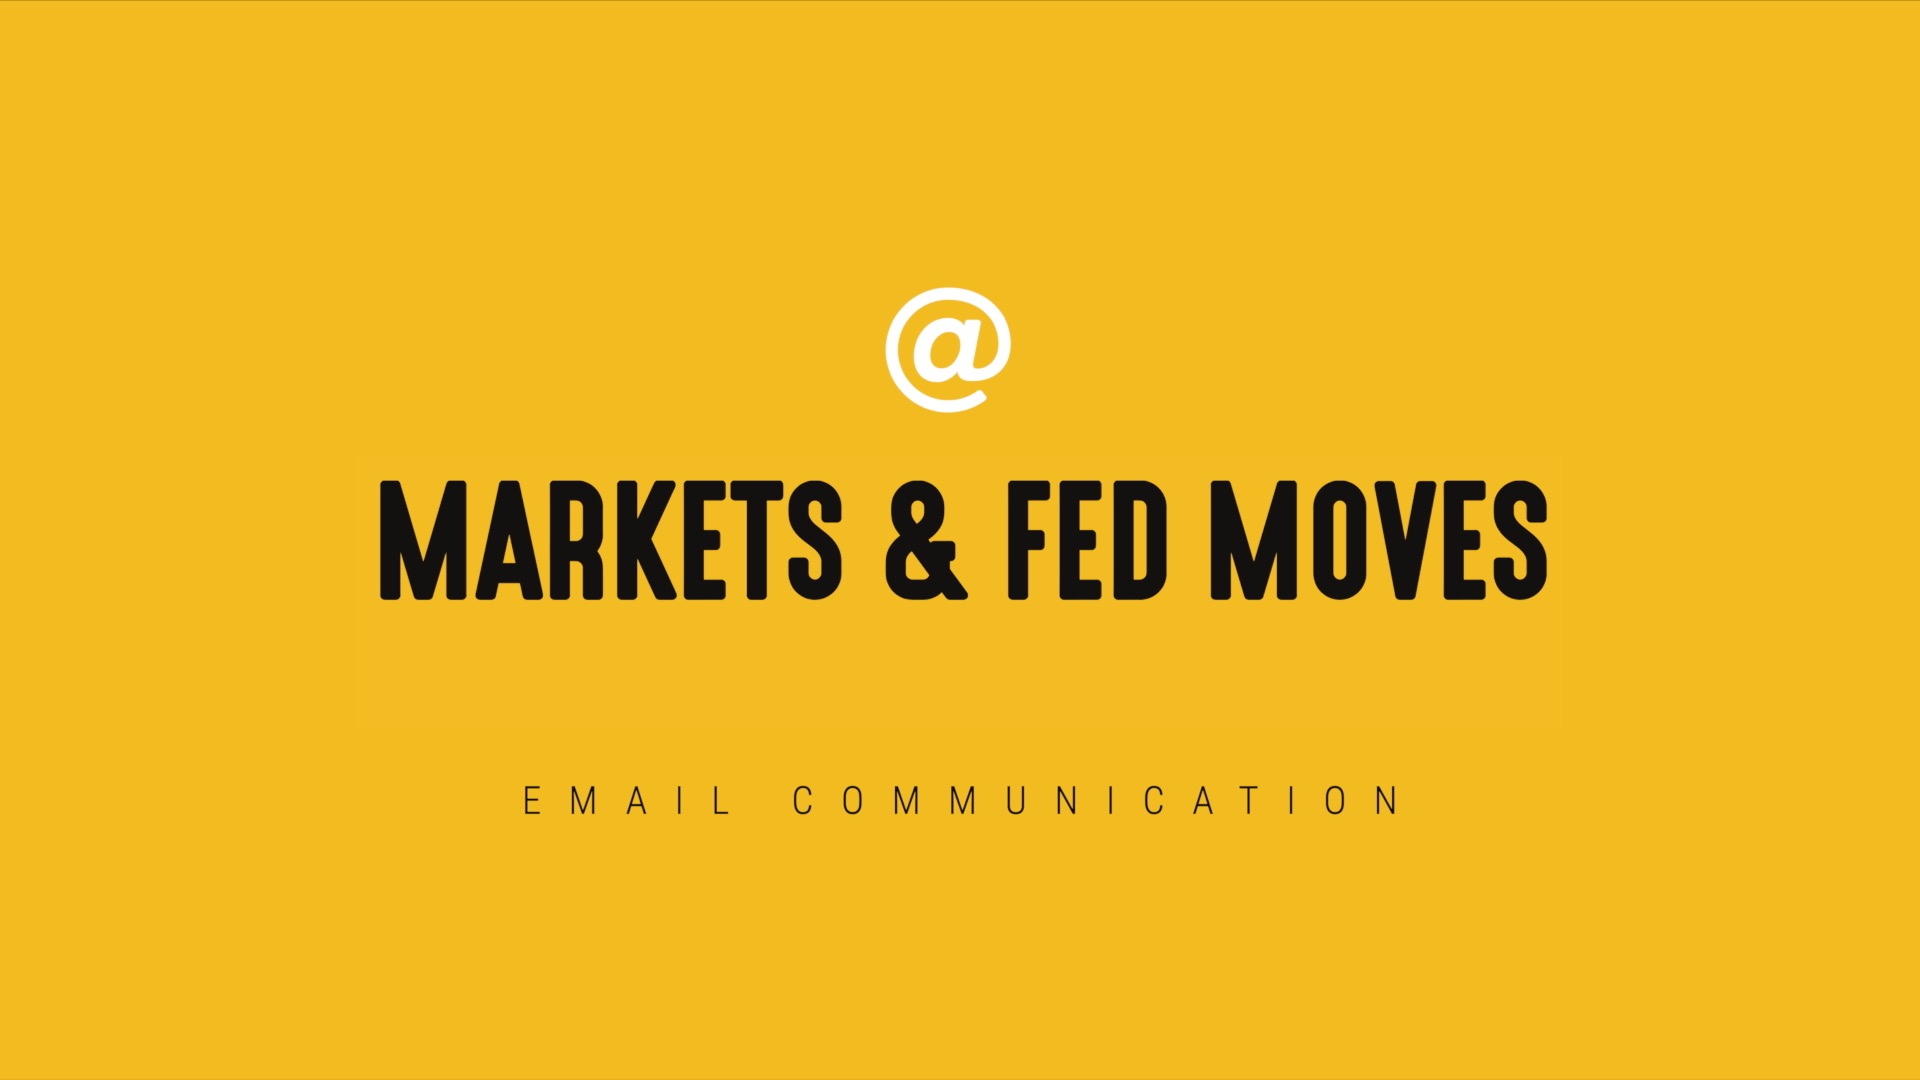 [NEW] Markets & Fed Moves - Timely Email